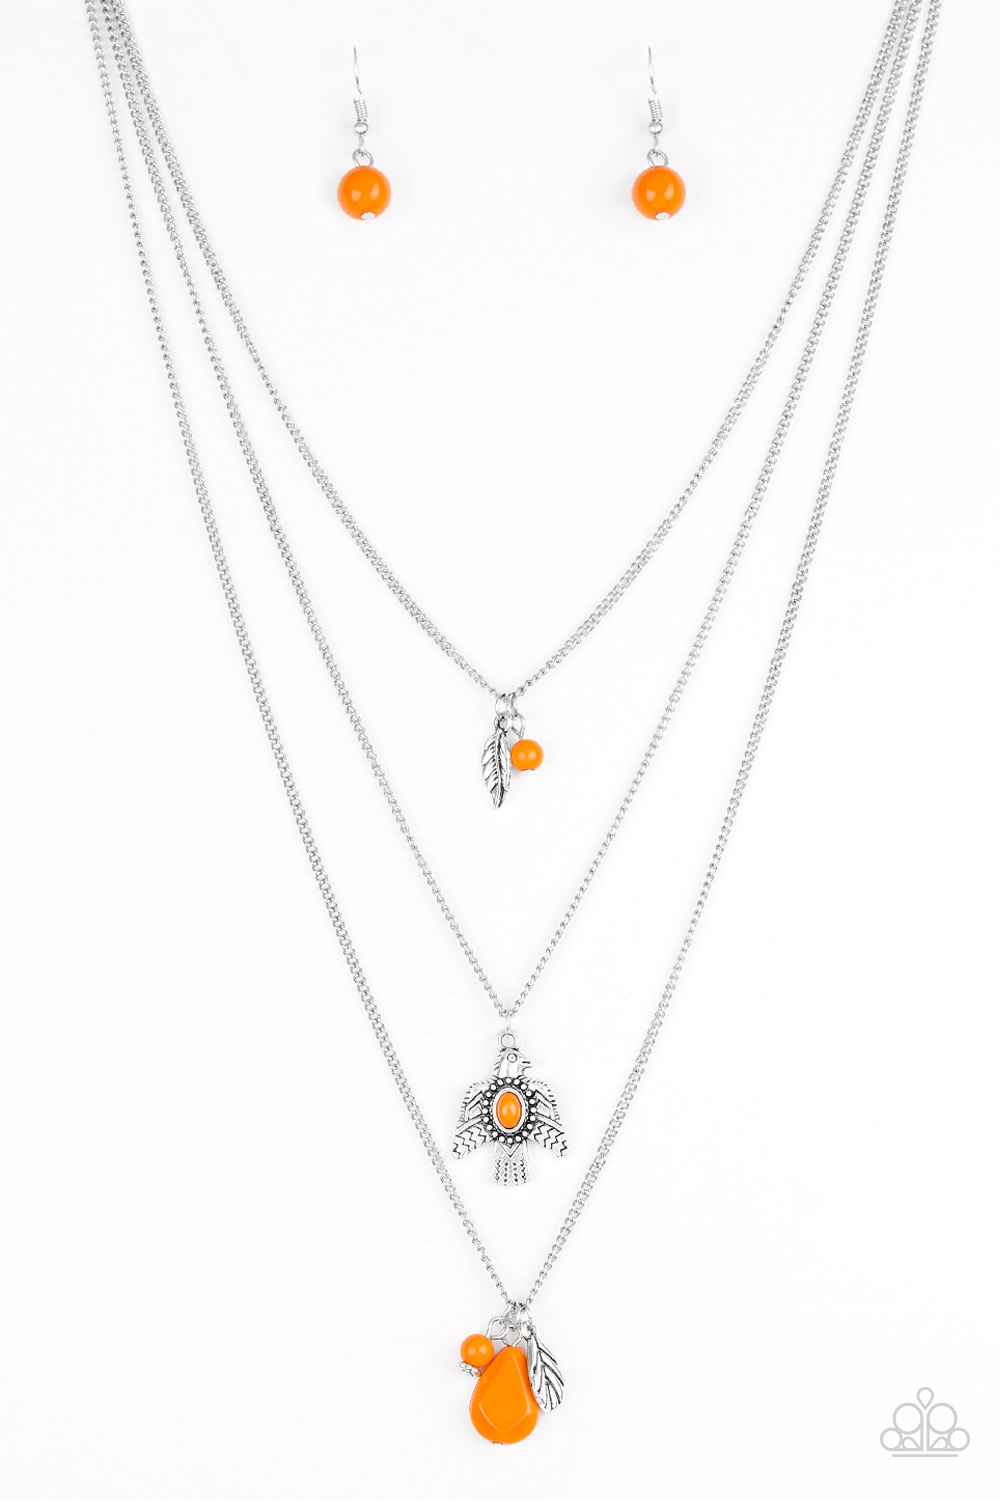 Necklace - Soar With The Eagles - Orange